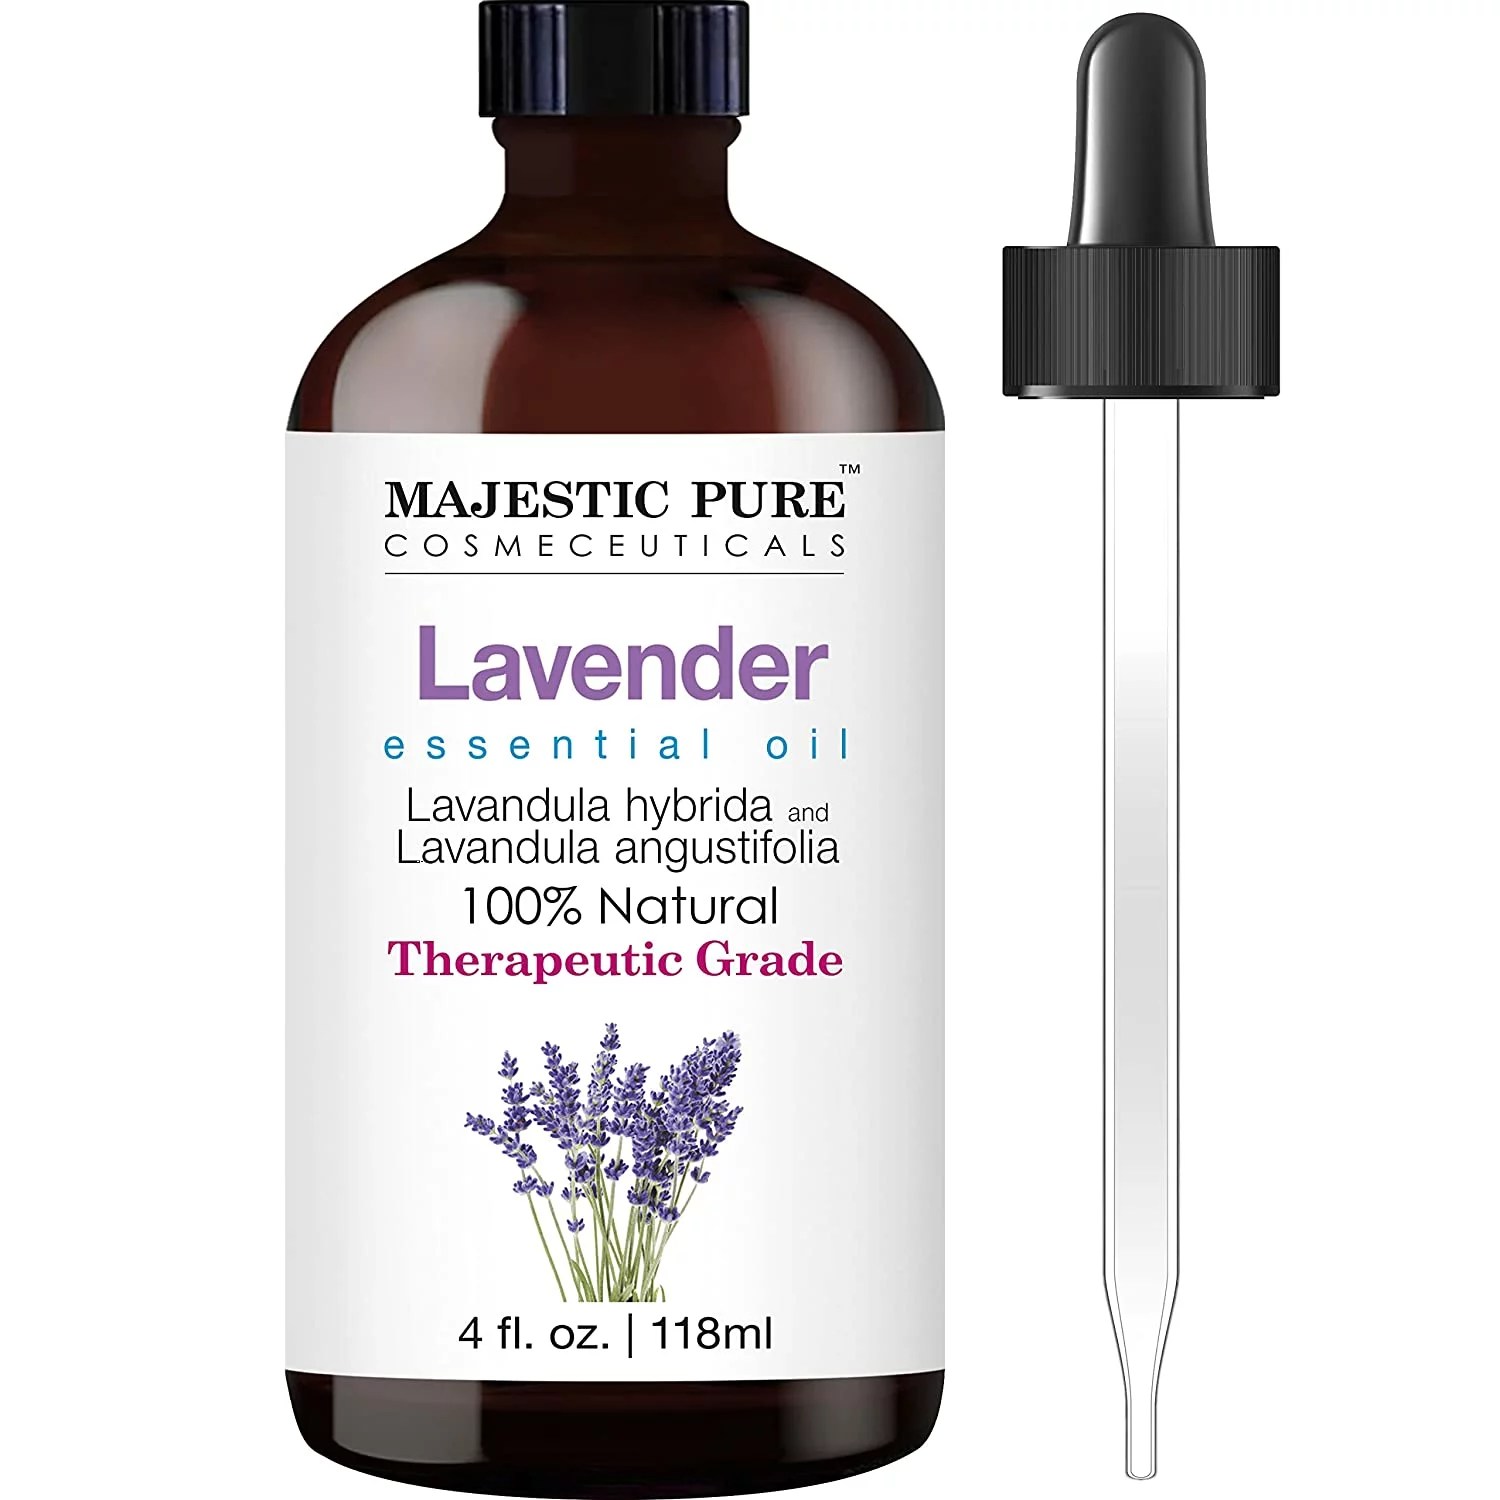 A bottle of Majestic Pure Lavender Essential Oil.